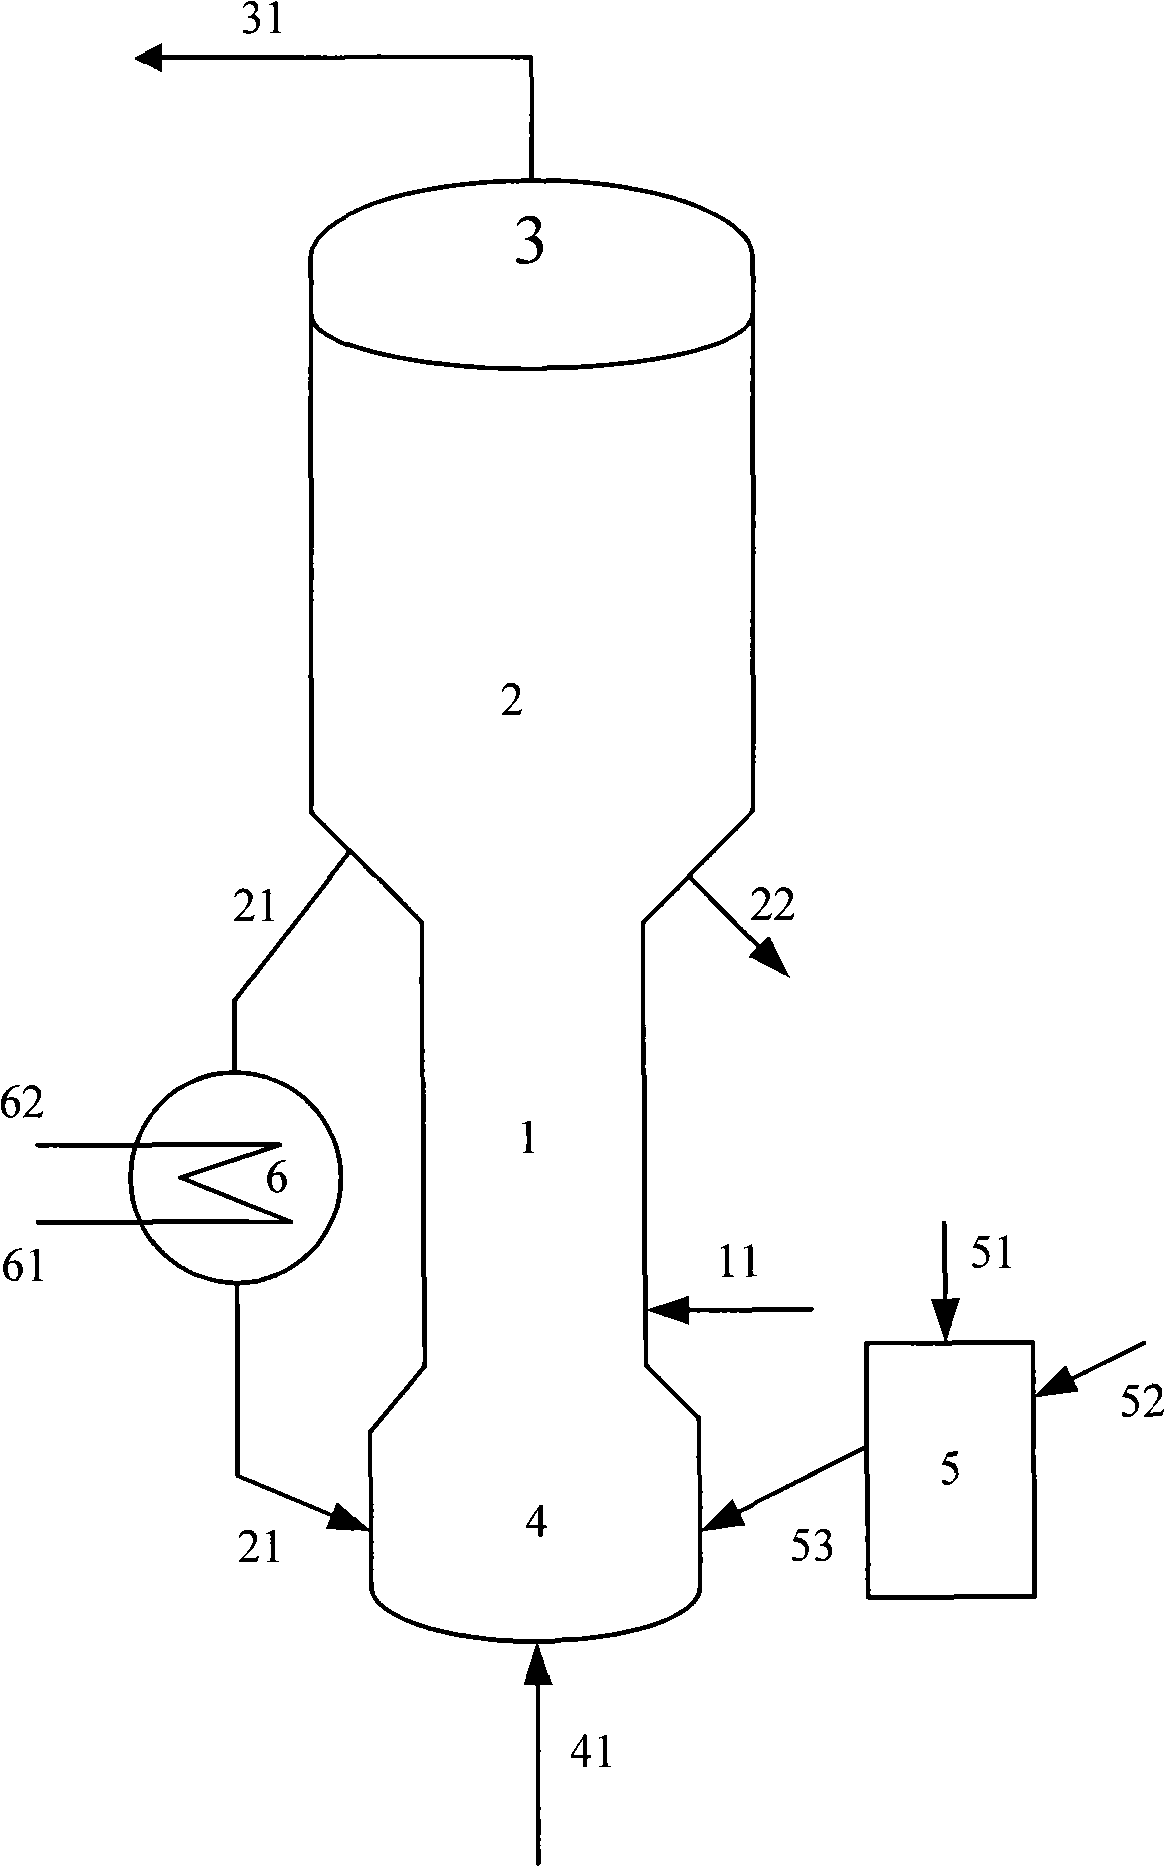 Method for preparing dimethyl ether, low carbon olefin hydrocarbon with combination of methanol dehydration catalytic pyrolysis